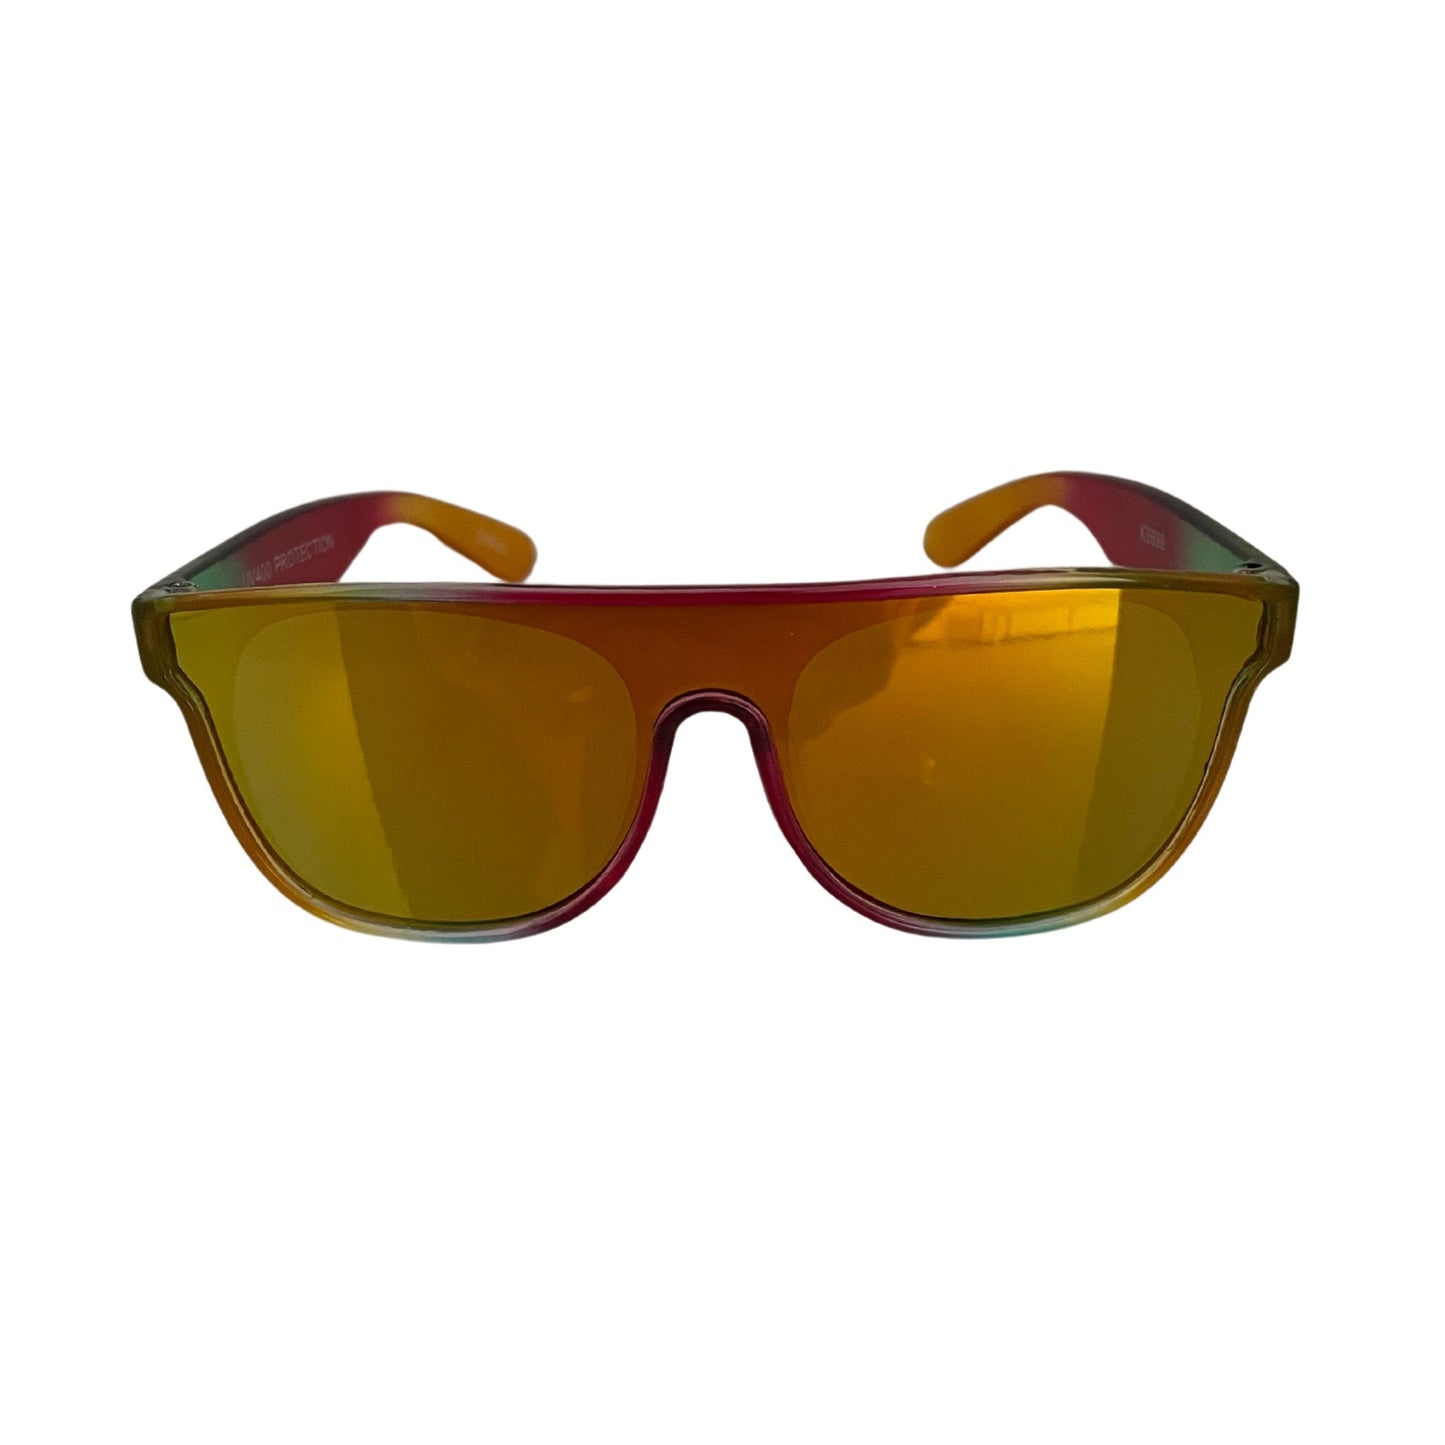 Kids Bright Polycarbonate Sunglasses - Electric Yellow